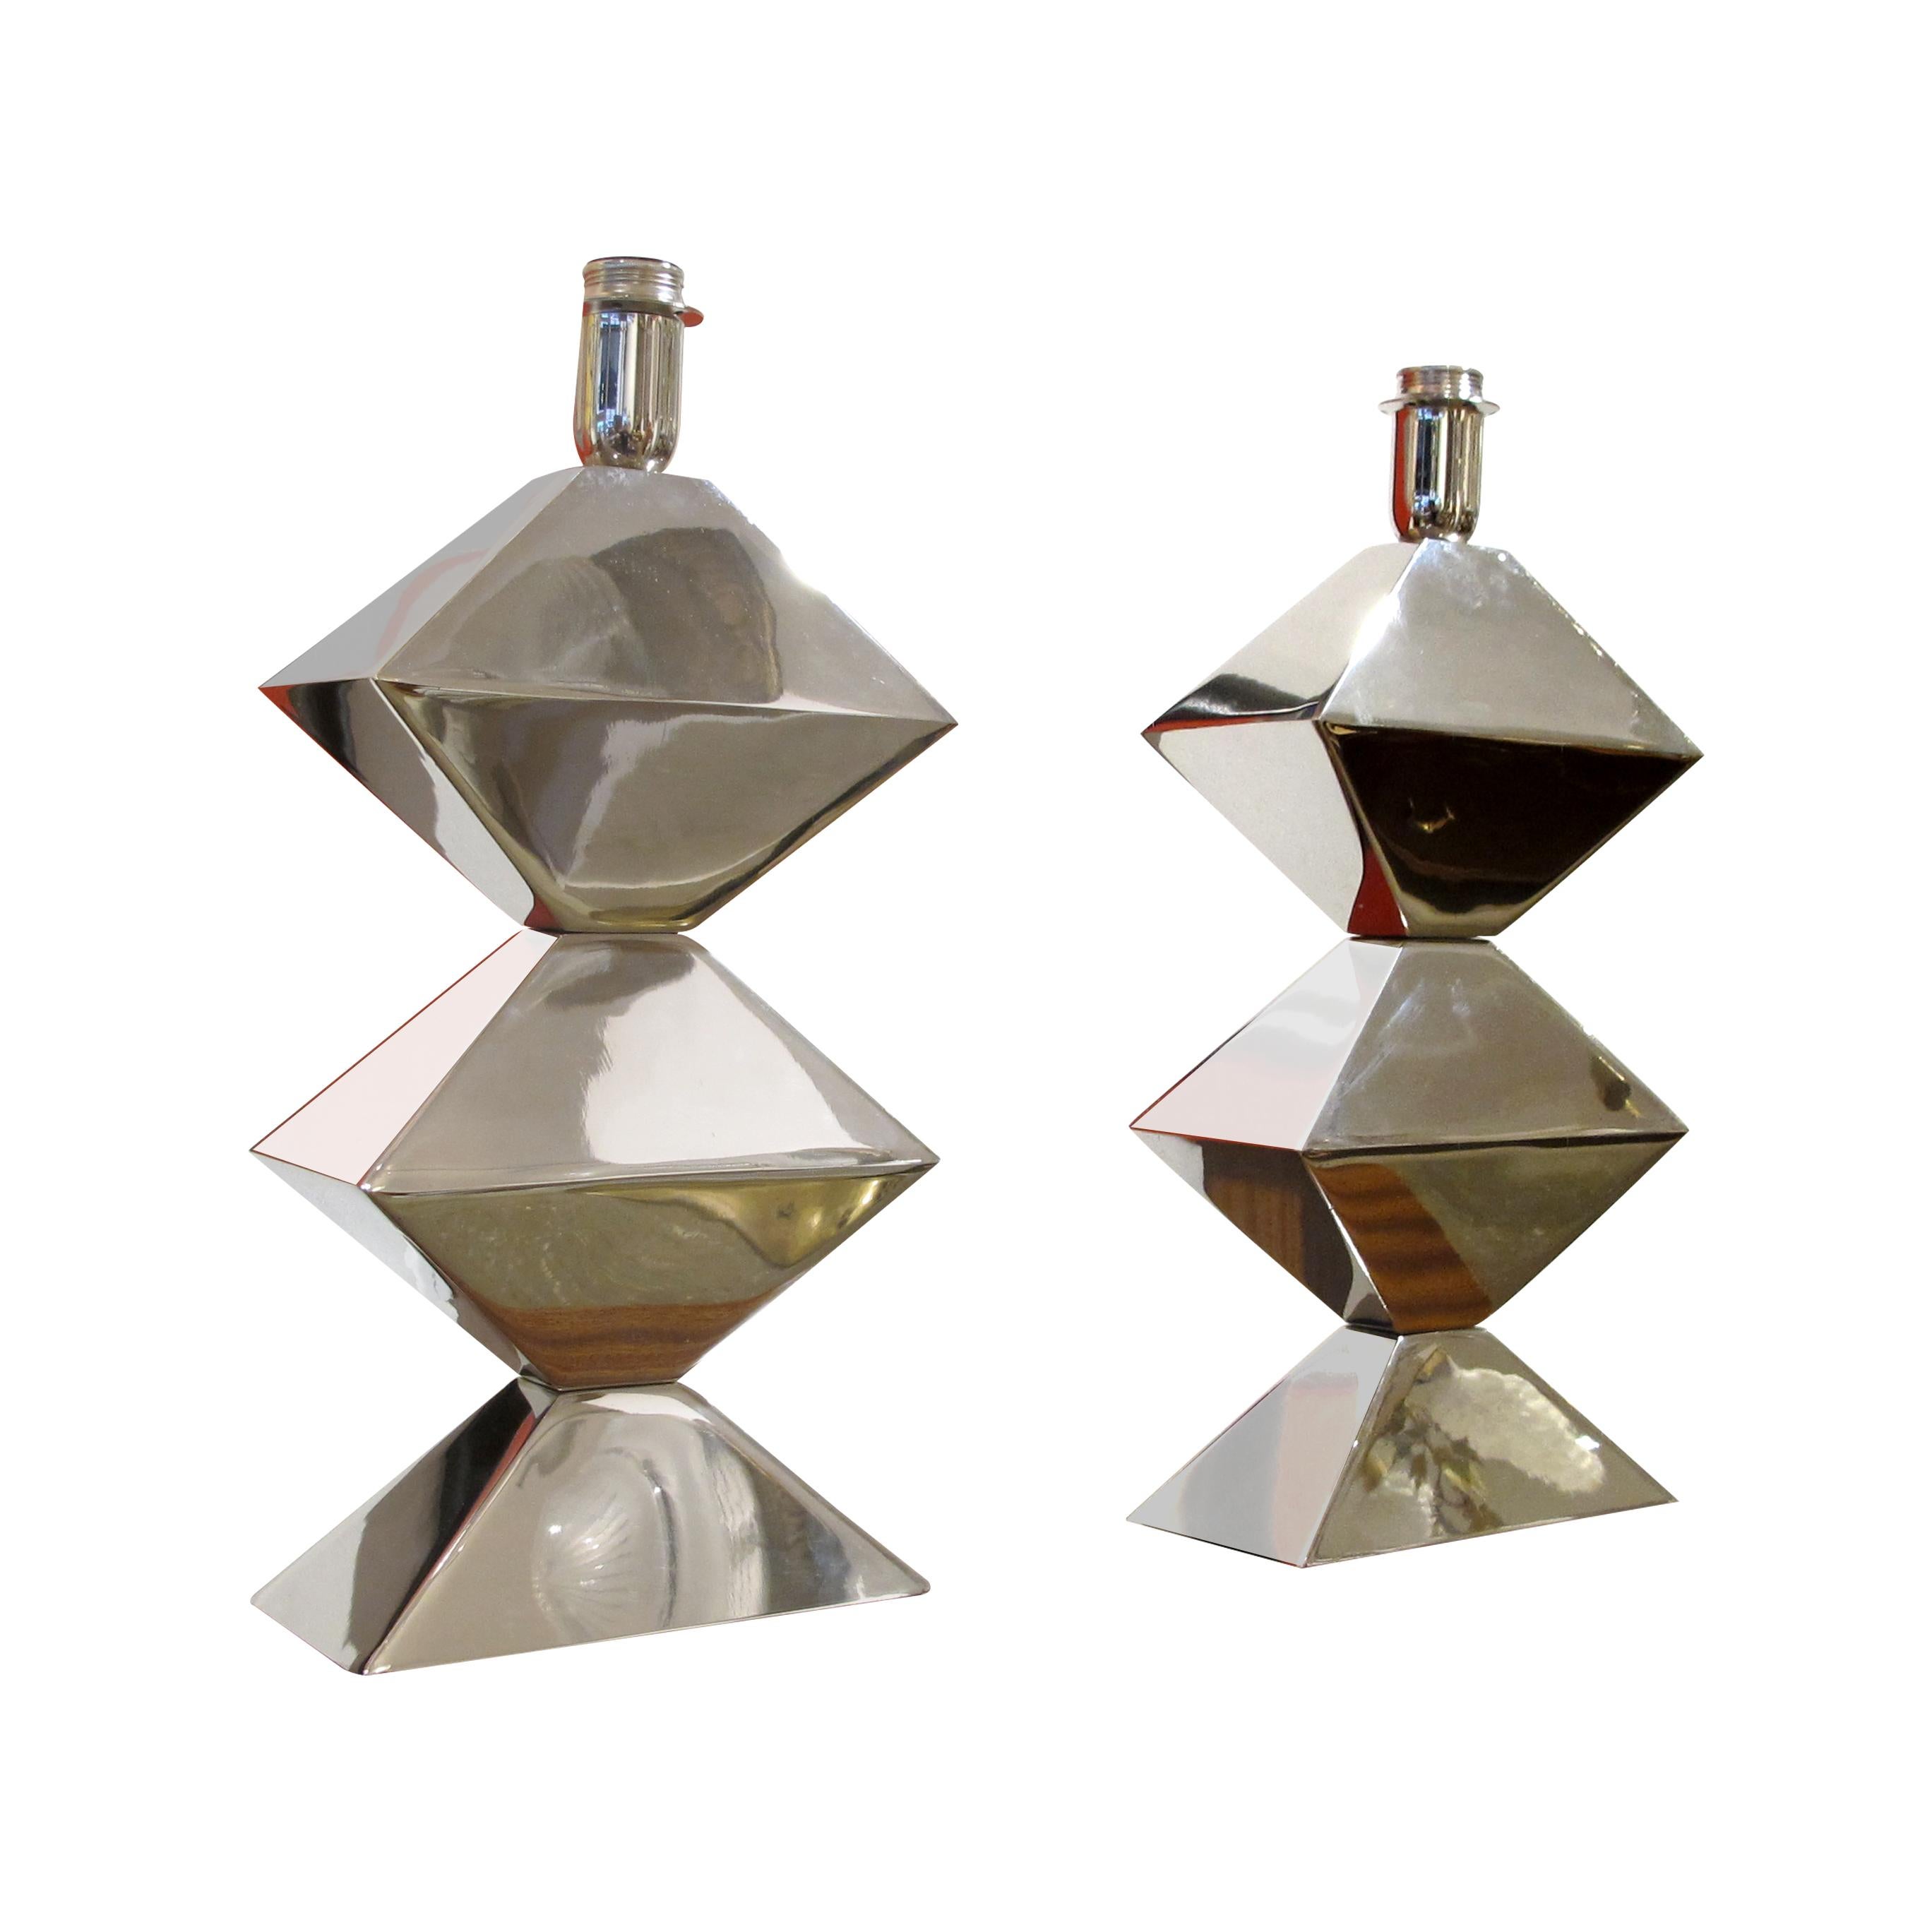 Pair of French geometric modern design table lamps. They are sleek and stylish, with a minimalist form and the lamps are nickel chrome-plated with a high shine. The chrome-plated surface gleams brilliantly, reflecting ambient light that elevates any